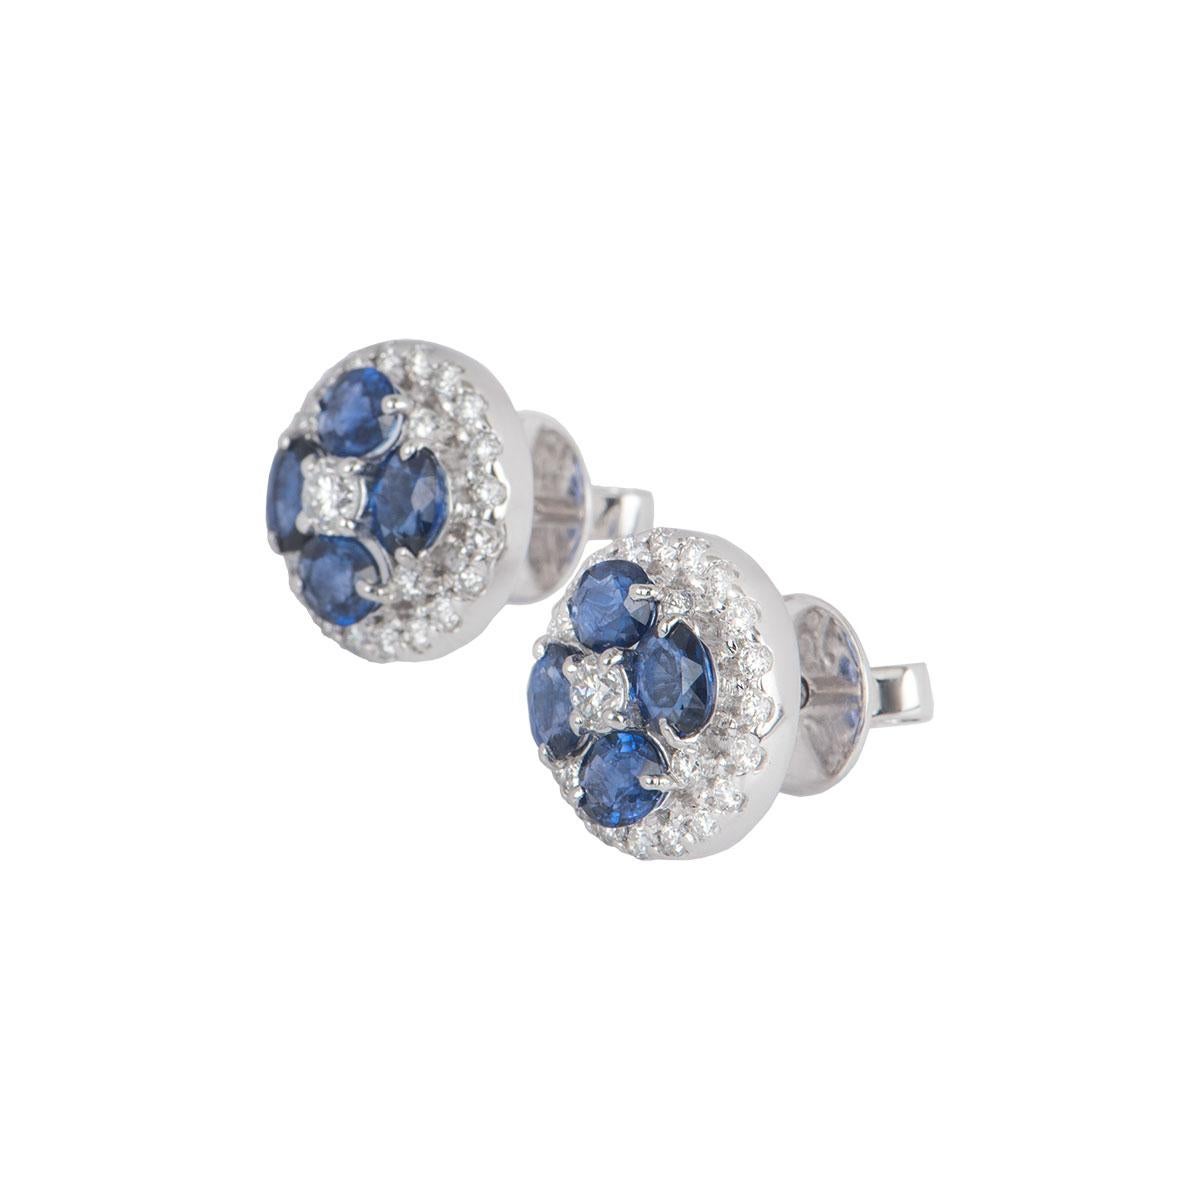 A pair of 18k white gold diamond and sapphire earrings. Featuring a floral design with a round brilliant cut diamond in the centre surrounded by four oval cut sapphires with a halo of round brilliant cut diamonds. The diamonds have a total weight of